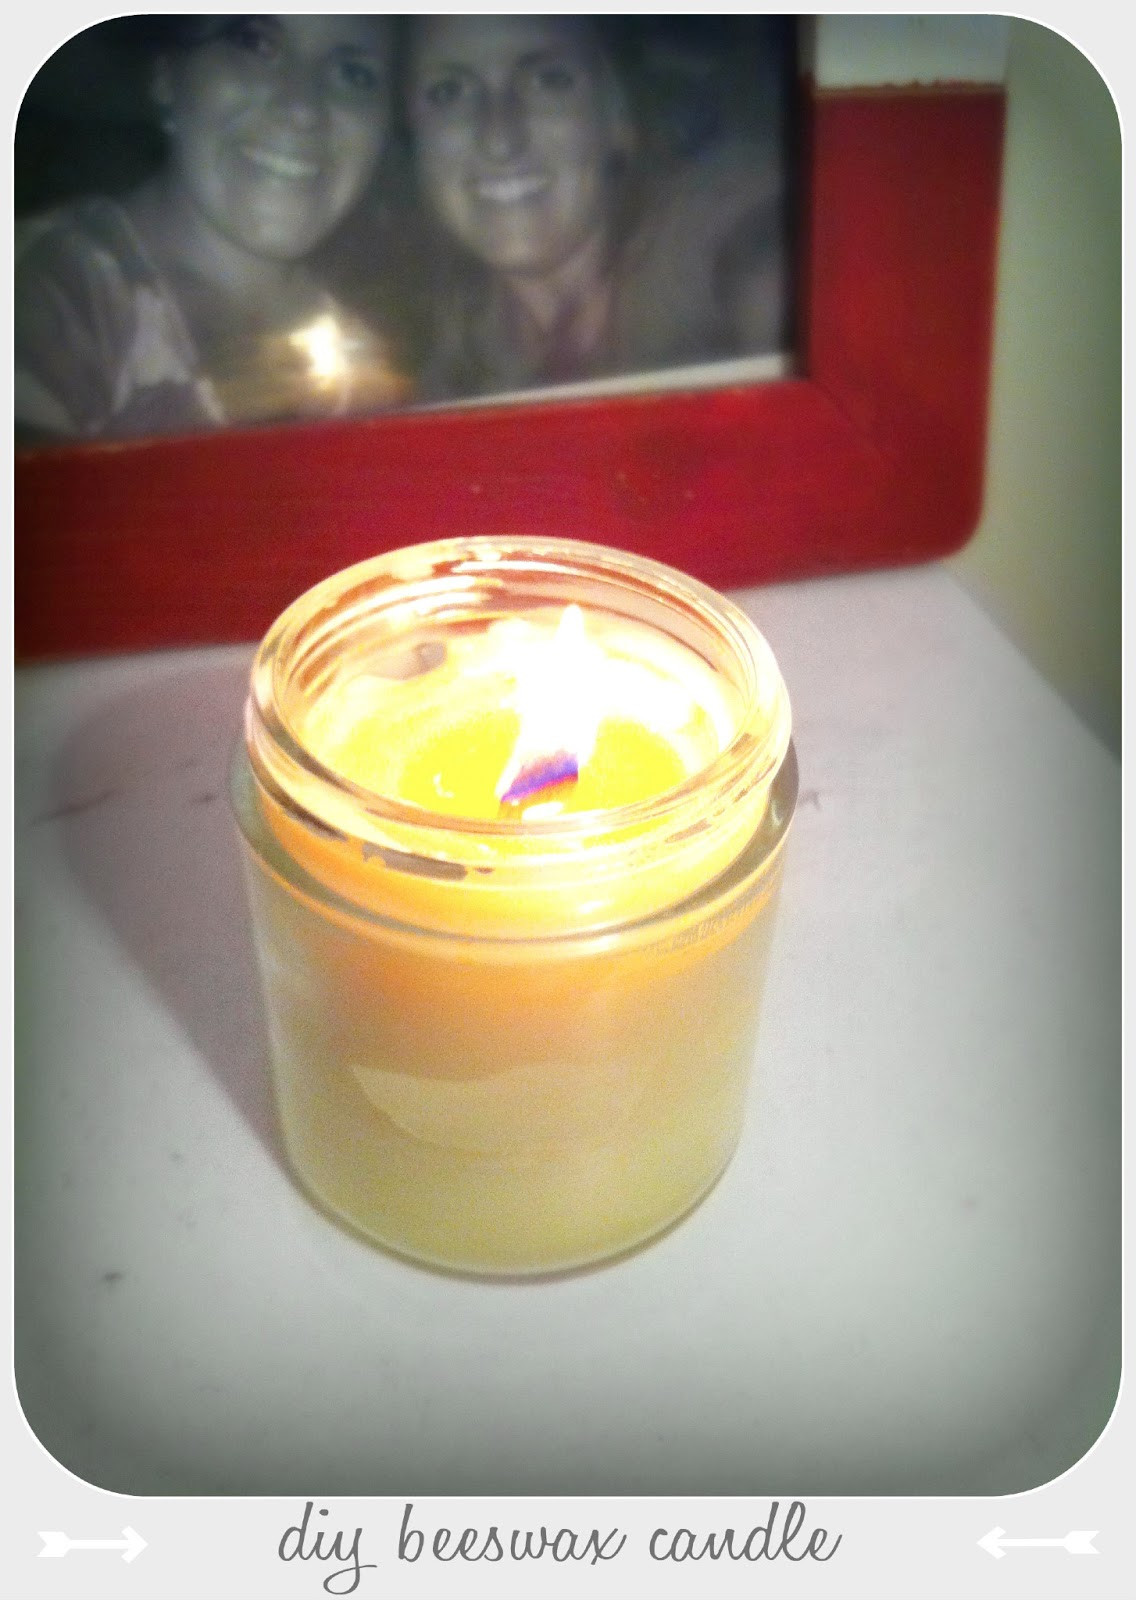 DIY Wood Wick Candles
 Past Tense of Draw Saturday DIY Wood Wick Beeswax Candles